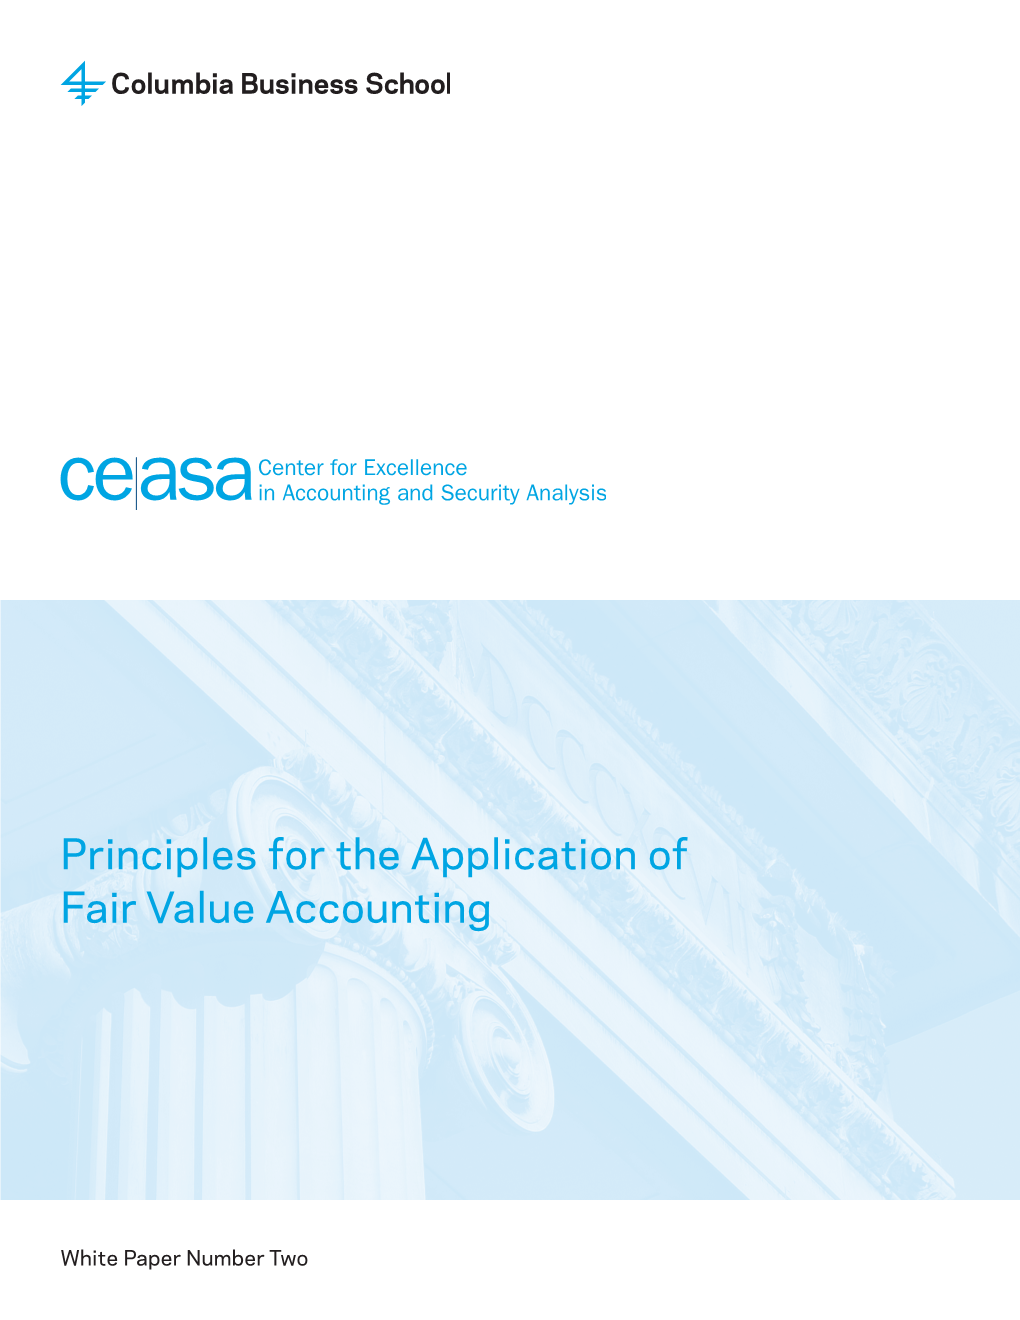 Principles for the Application of Fair Value Accounting